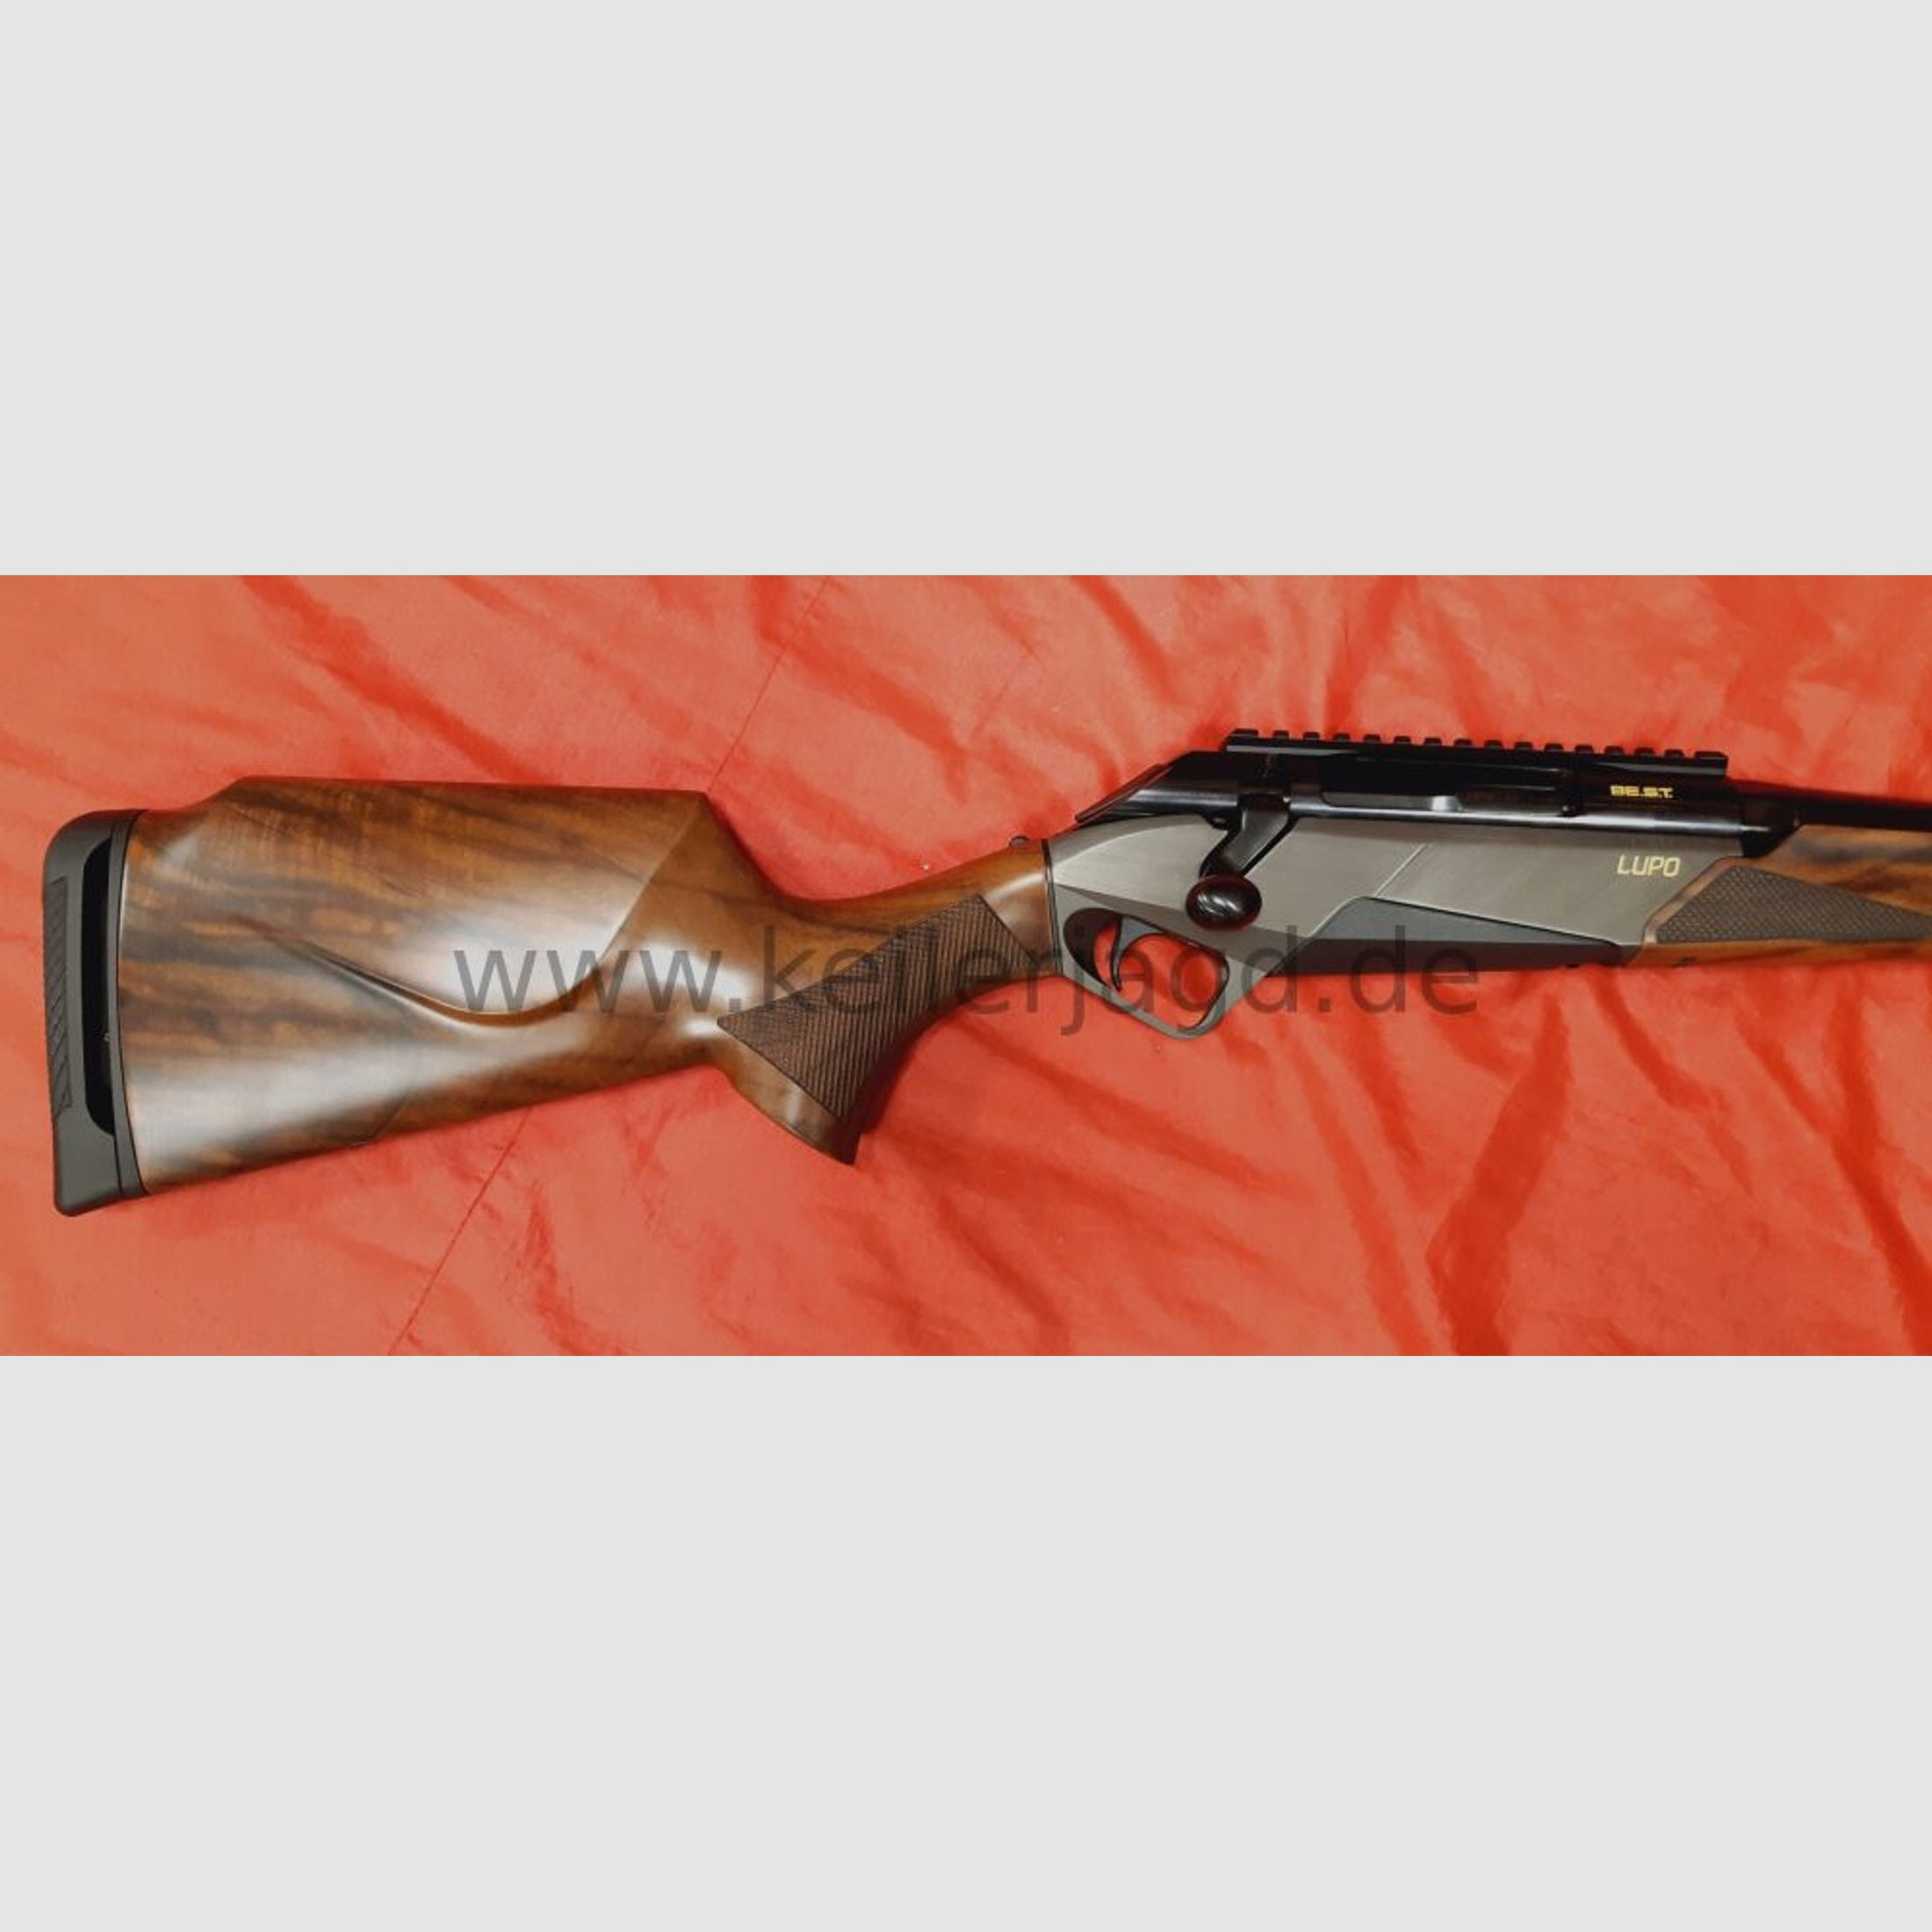 Benelli Lupo Holz Kal. 308 Win